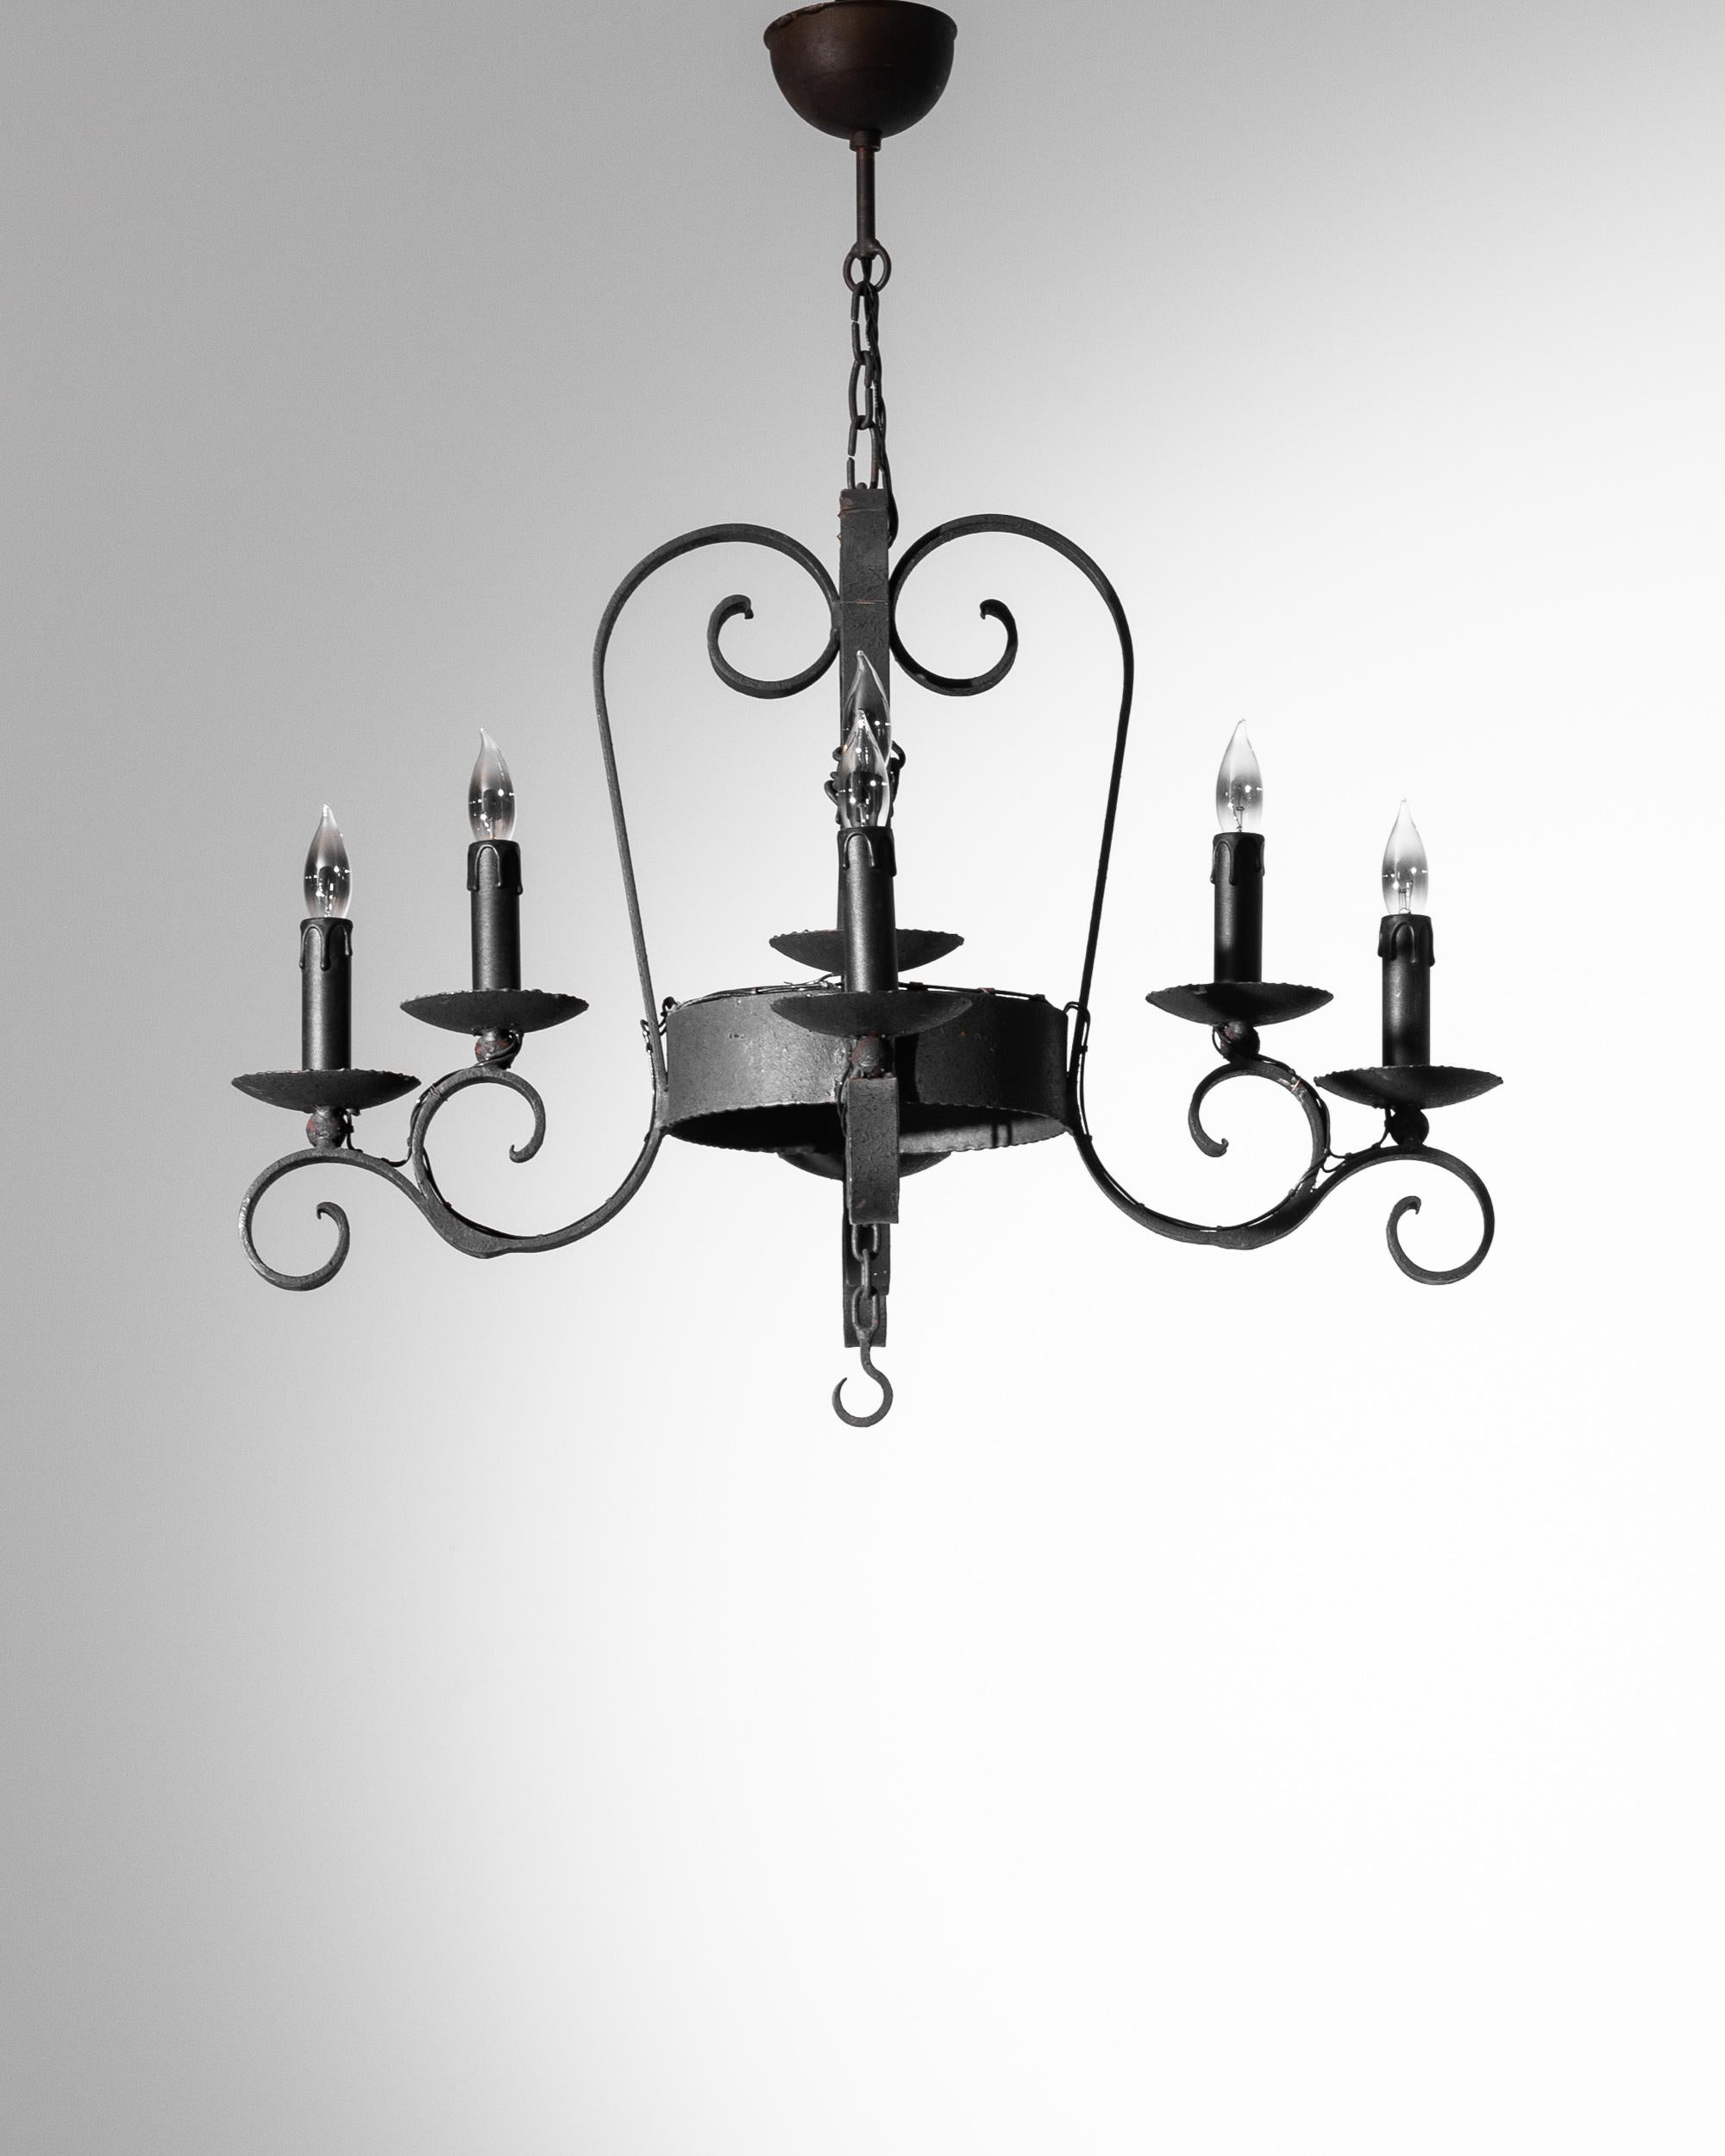 This vintage metal chandelier lends a note of gothic glamour to your space. Made in Belgium in the 1940s, a design of coiling wrought iron scrolls supports an arrangement of eight flame-shaped bulbs, throwing a striking shadow when illuminated. Mock